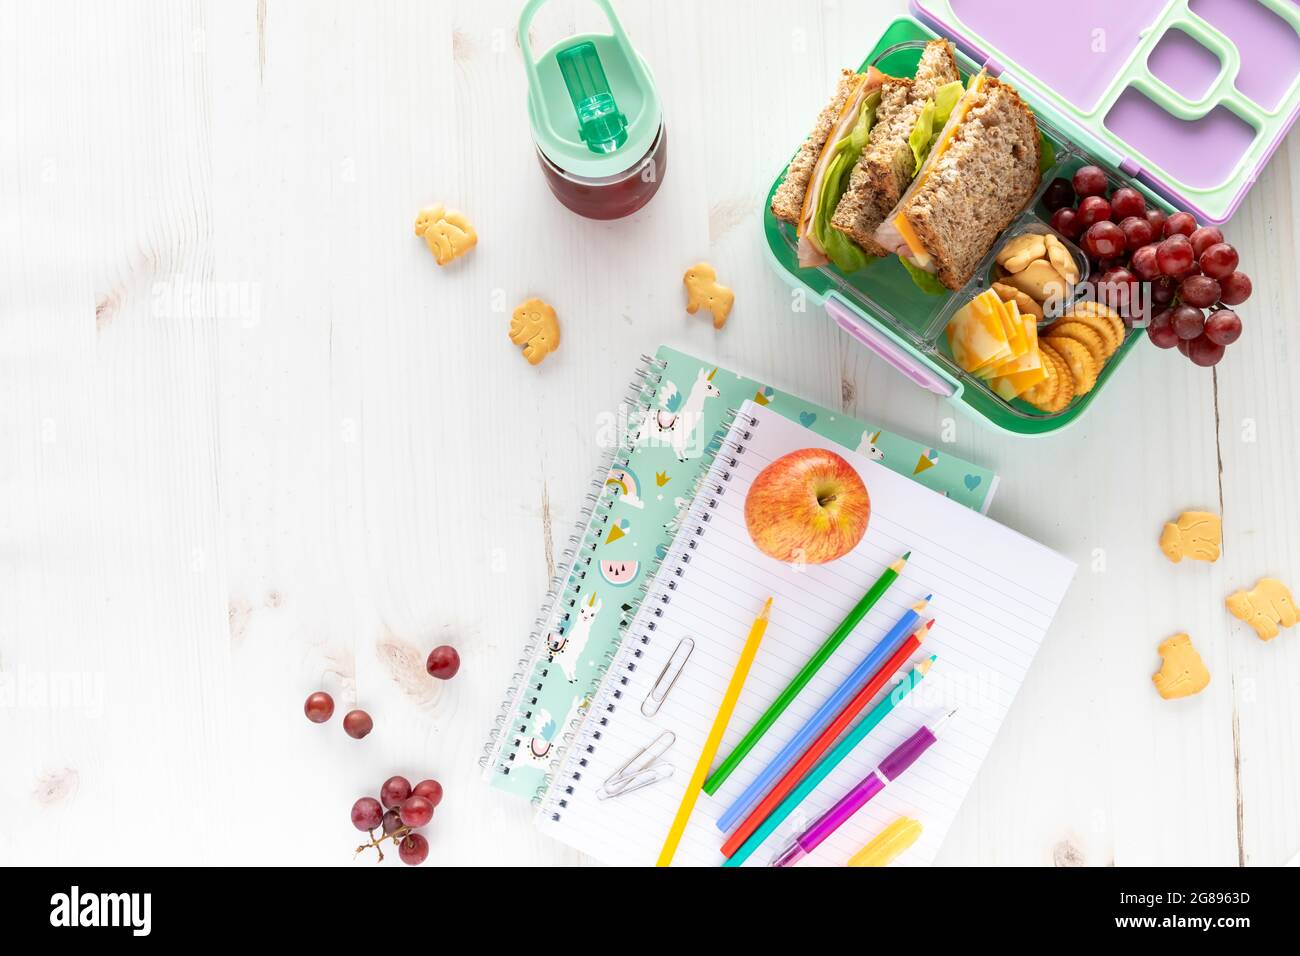 https://c8.alamy.com/comp/2G8963D/top-down-view-of-school-supplies-and-lunch-on-a-light-background-back-to-school-concept-2G8963D.jpg